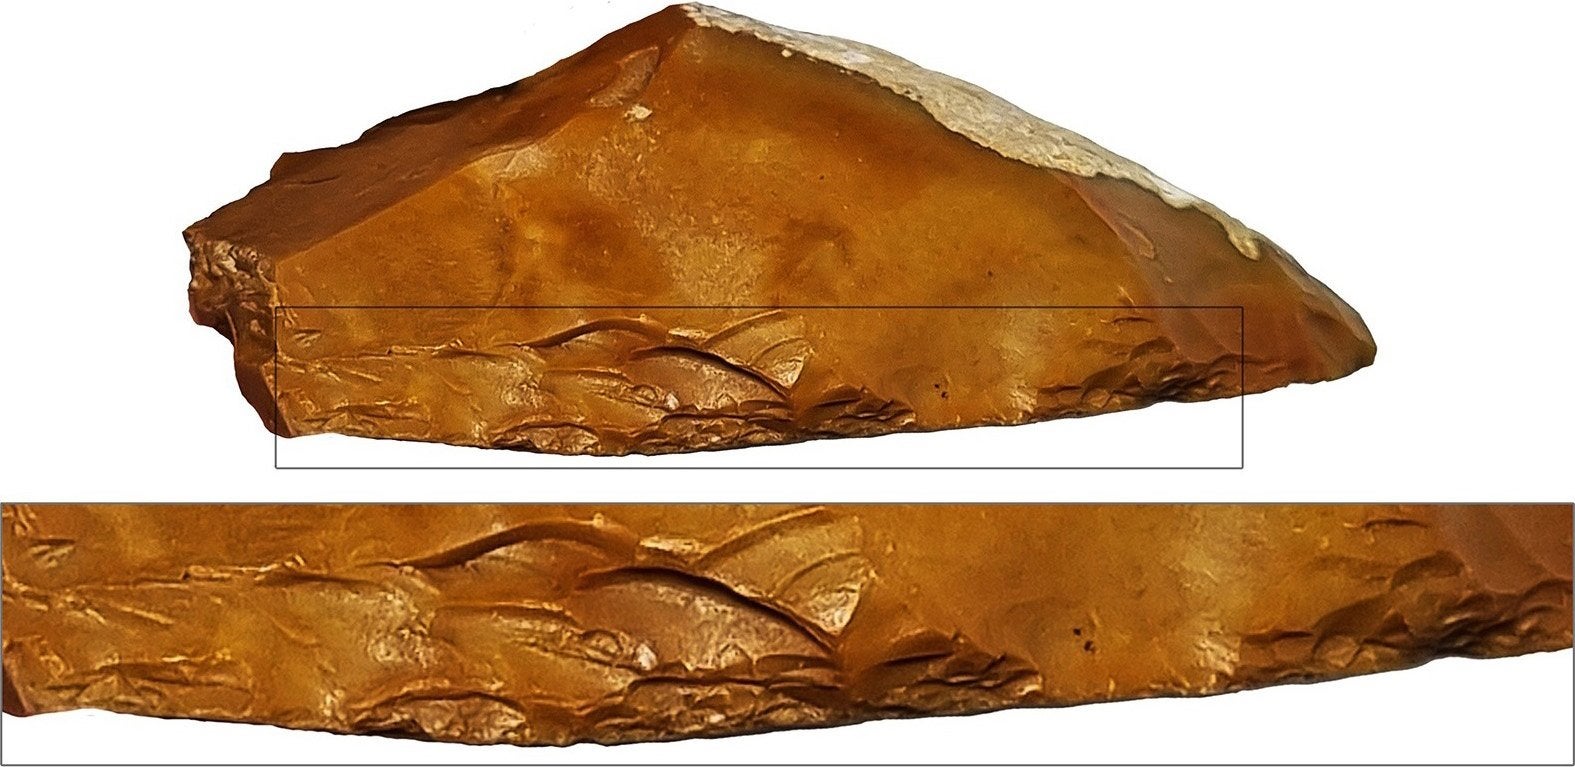 Quina scrapers were developed around 400,000 years ago